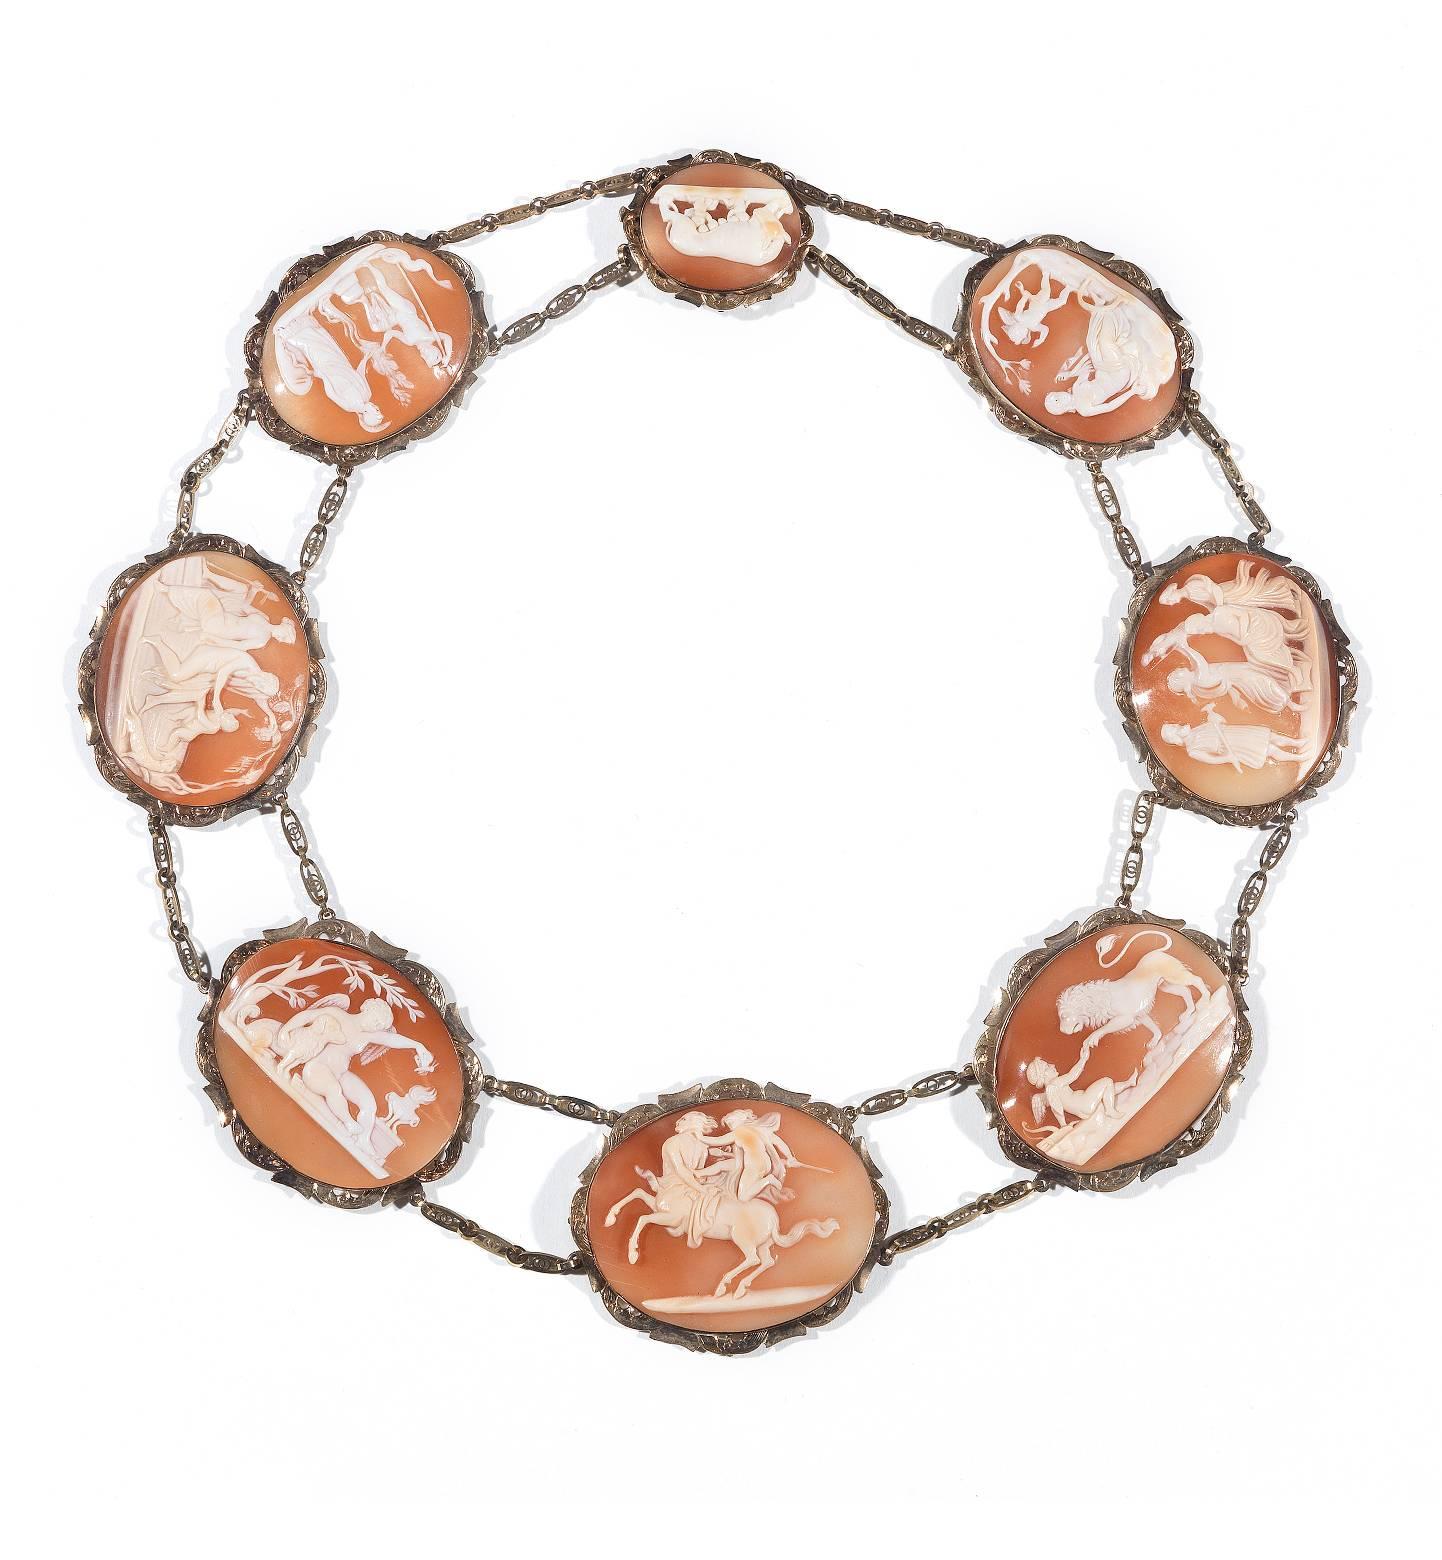 
BERNARDO ANTICHITÀ Ponte Vecchio Florence 

The necklace composed of eight shell cameos each carved to depict a classical scene, taken from works of Classic antiquities and Antonio Canova, including 'The Education of Bacchus', 'The Birth of